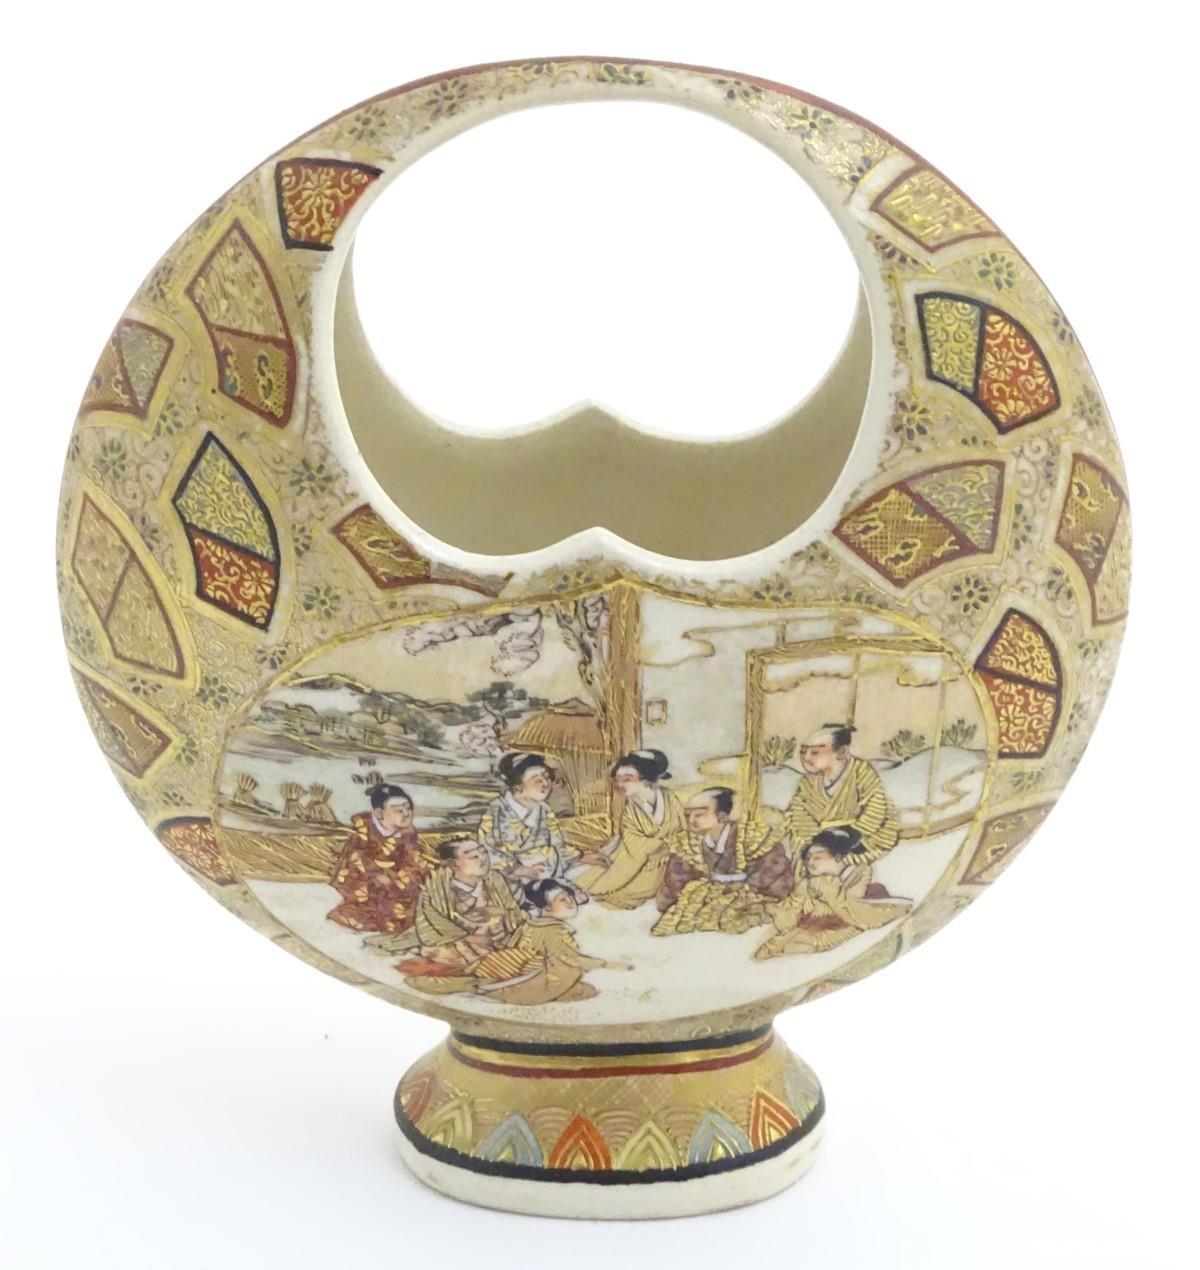 A Japanese satsuma moon basket vase with hand painted decoration depicting figures seated around - Image 17 of 20